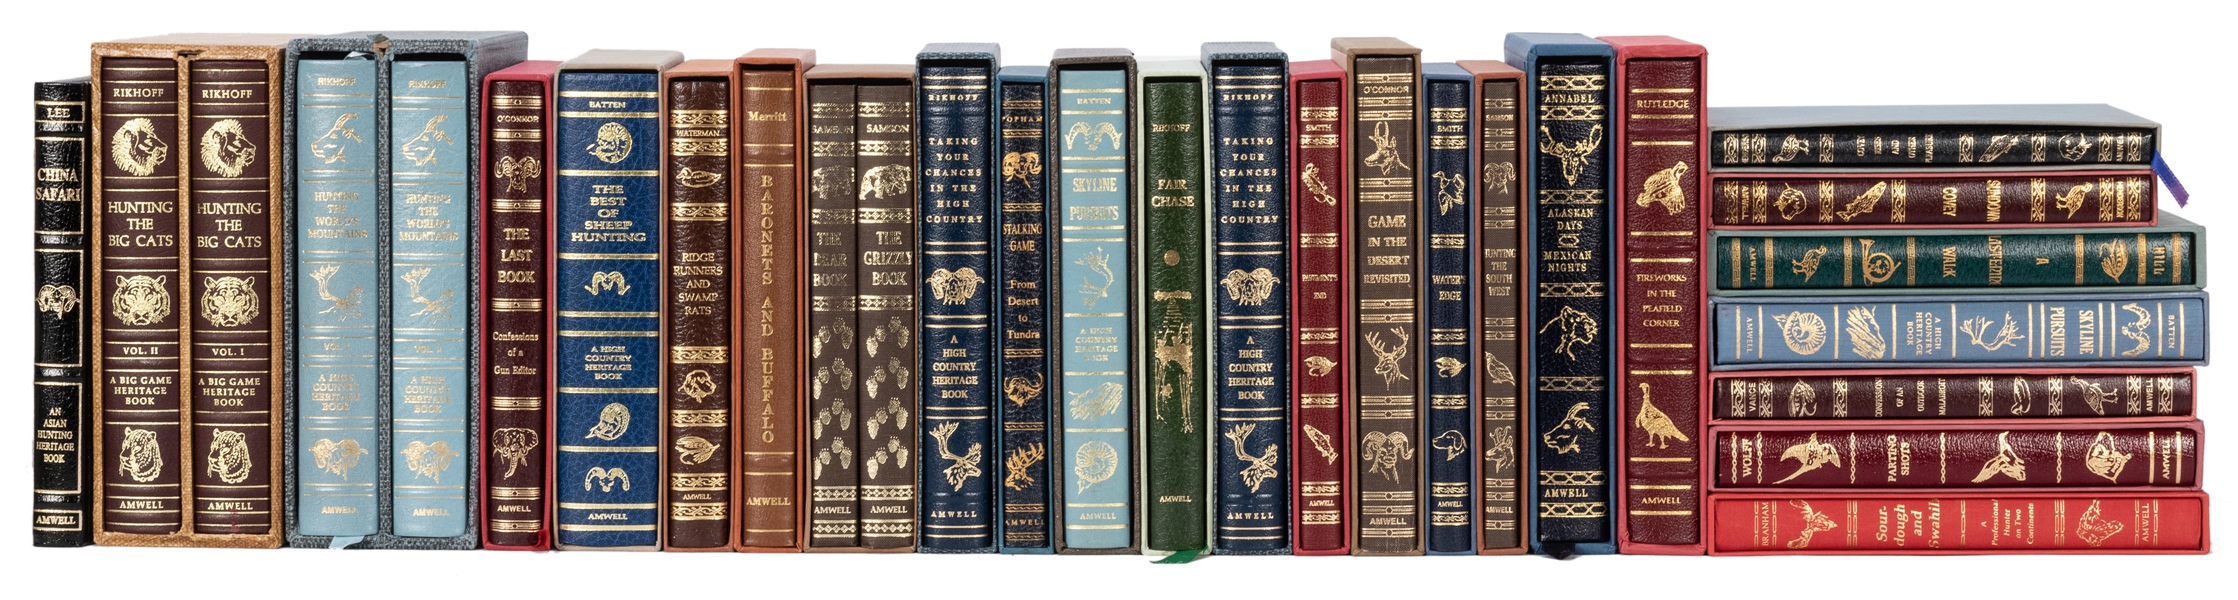 Group of 32 Hunting Titles from Amwell Press, [many signed and limited].